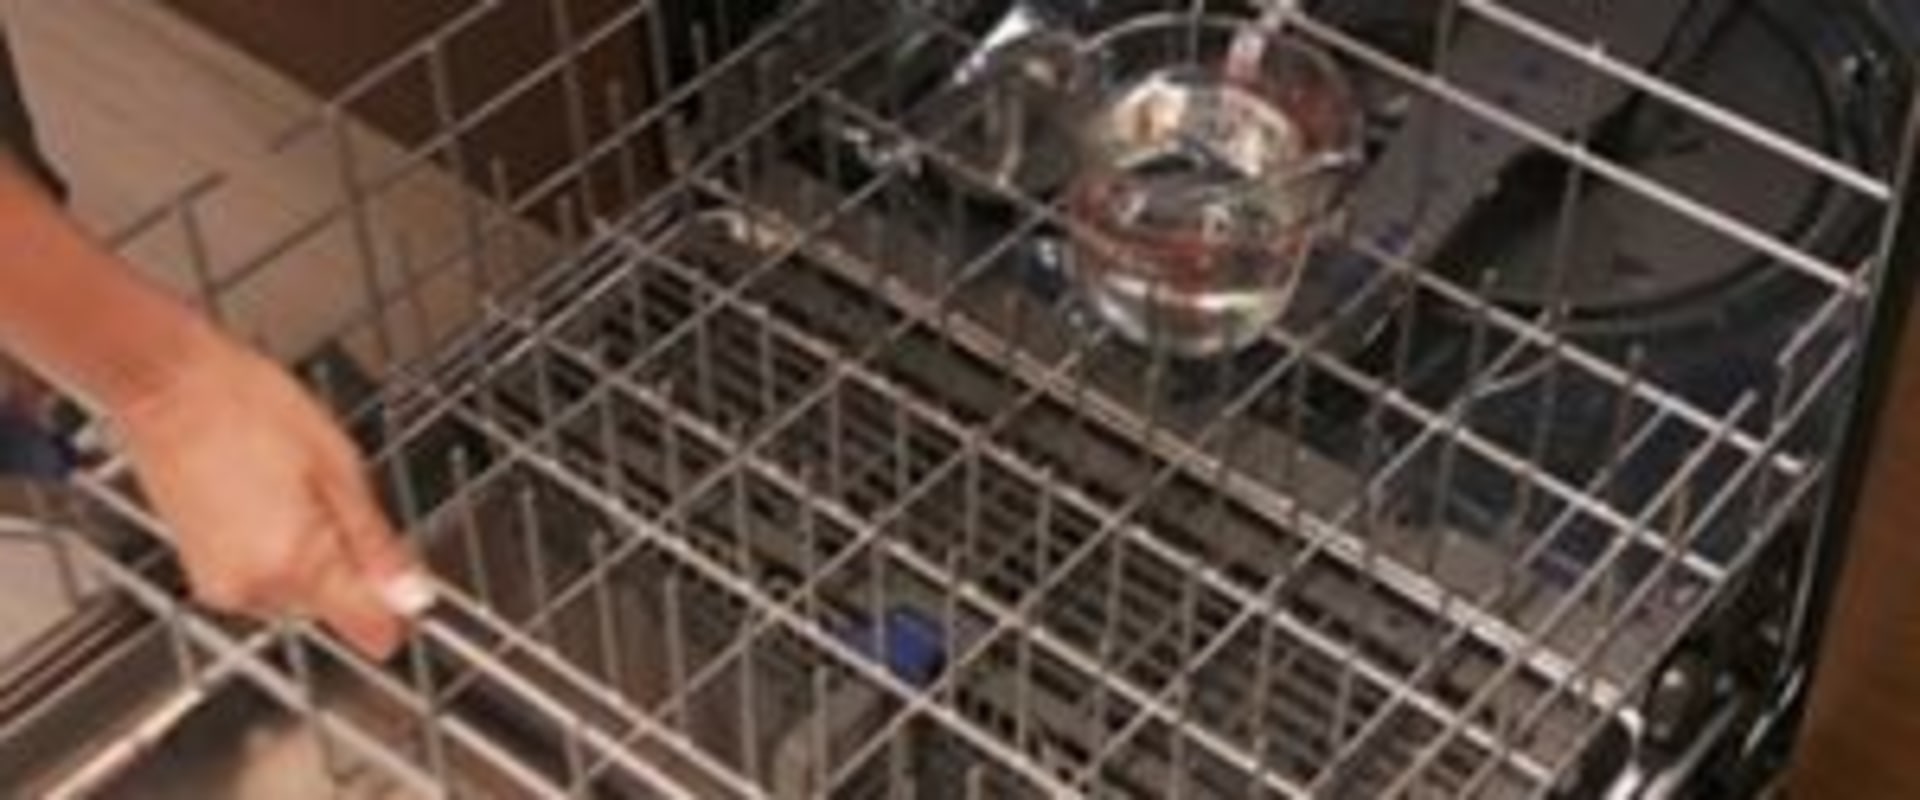 What is the best way to clean a dishwasher?